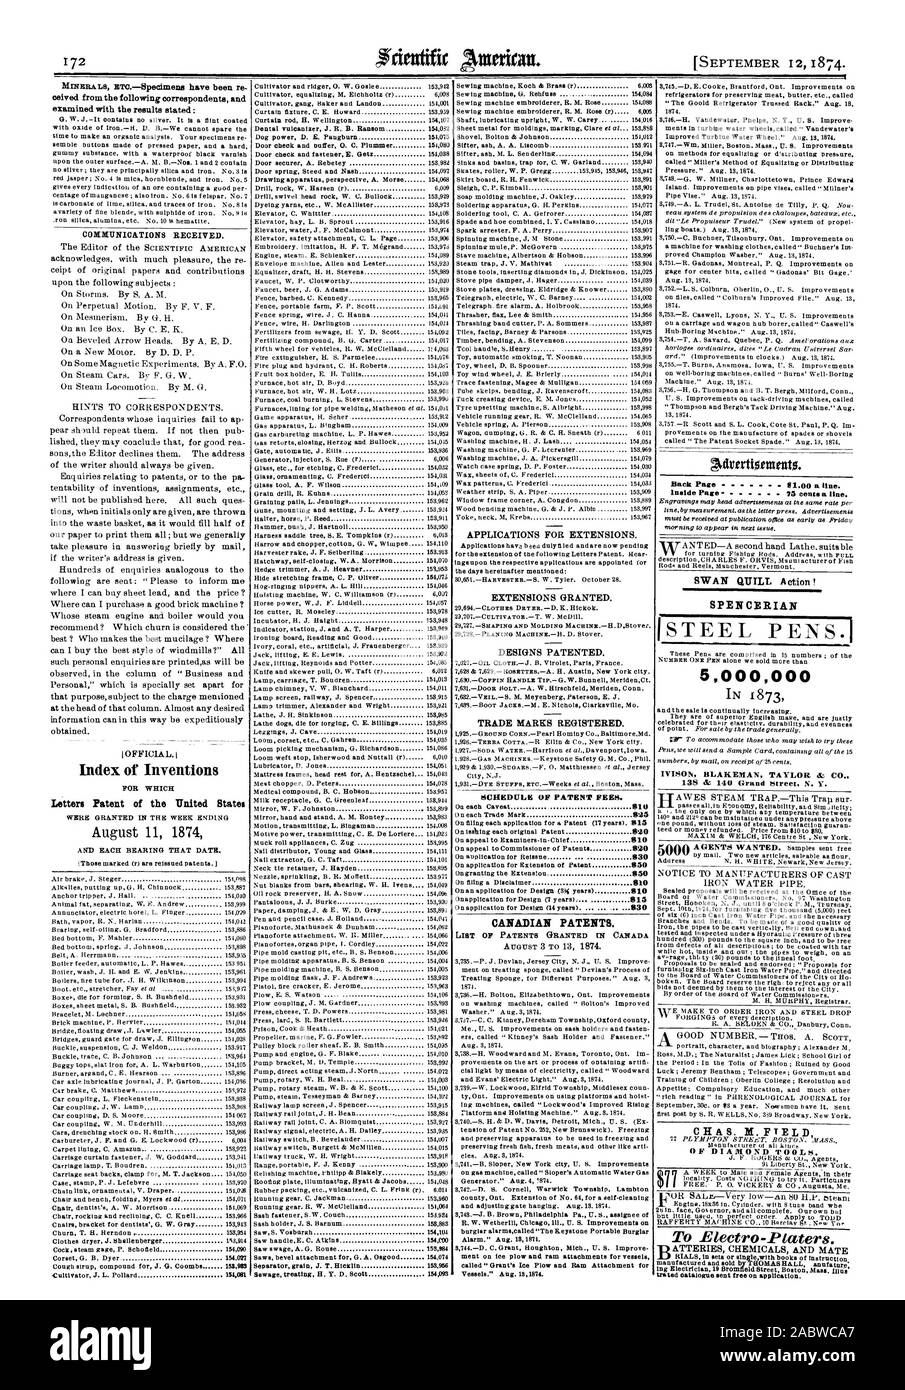 ceived from the following correspondents and examined with the results stated: COMMUNICATIONS RECEIVED. I OFFICIAL. Index of Inventions Letters Patent of the United States 153896 APPLICATIONS FOR EXTENSIONS. EXTENSIONS GRANTED. DESIGNS PATENTED. TRADE MARES REGISTERED. SCHEDULE OF PATENT FEES. 850 850 810 810 CANADIAN PATENTS. Adrertionnento. Back Pads  81.00 a line. Inside Page 75 cents& line. SPENCERIAN 5000000 IN 1873 IYISON BLAKEMAN TAYLOR & CO. CHAS. N. FTELD To Blectro-Platers. ATTERIES CHEMICALS AND MATE, scientific american, 74-09-12 Stock Photo